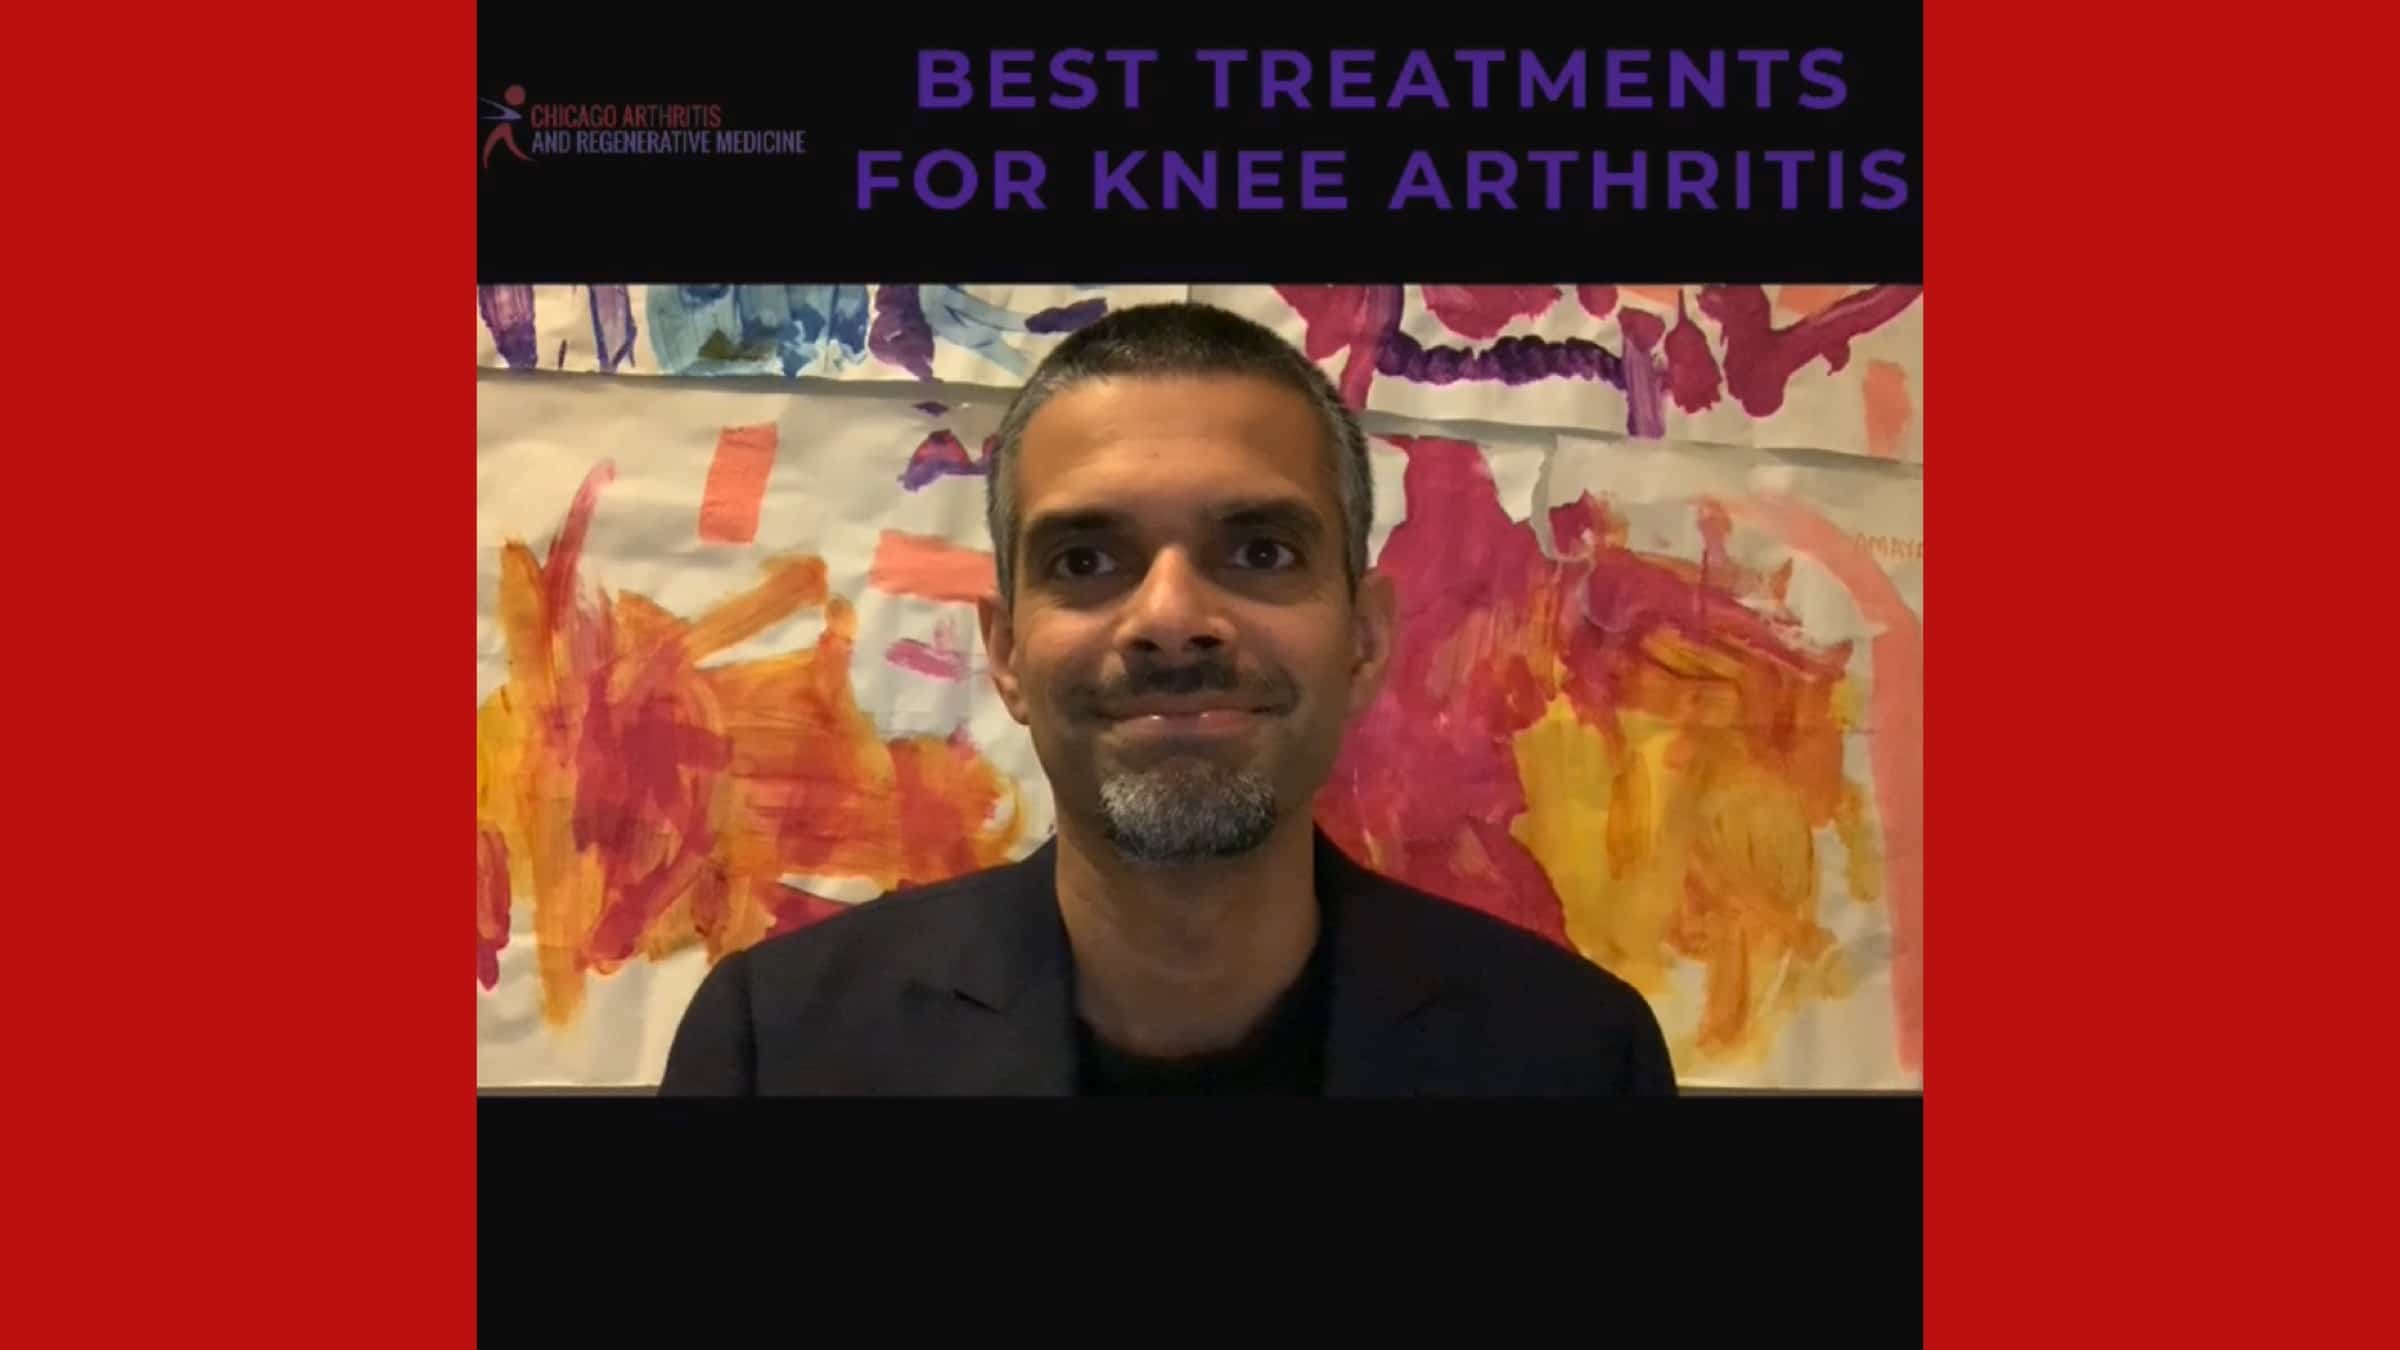 Best Initial Treatments for Knee Arthritis